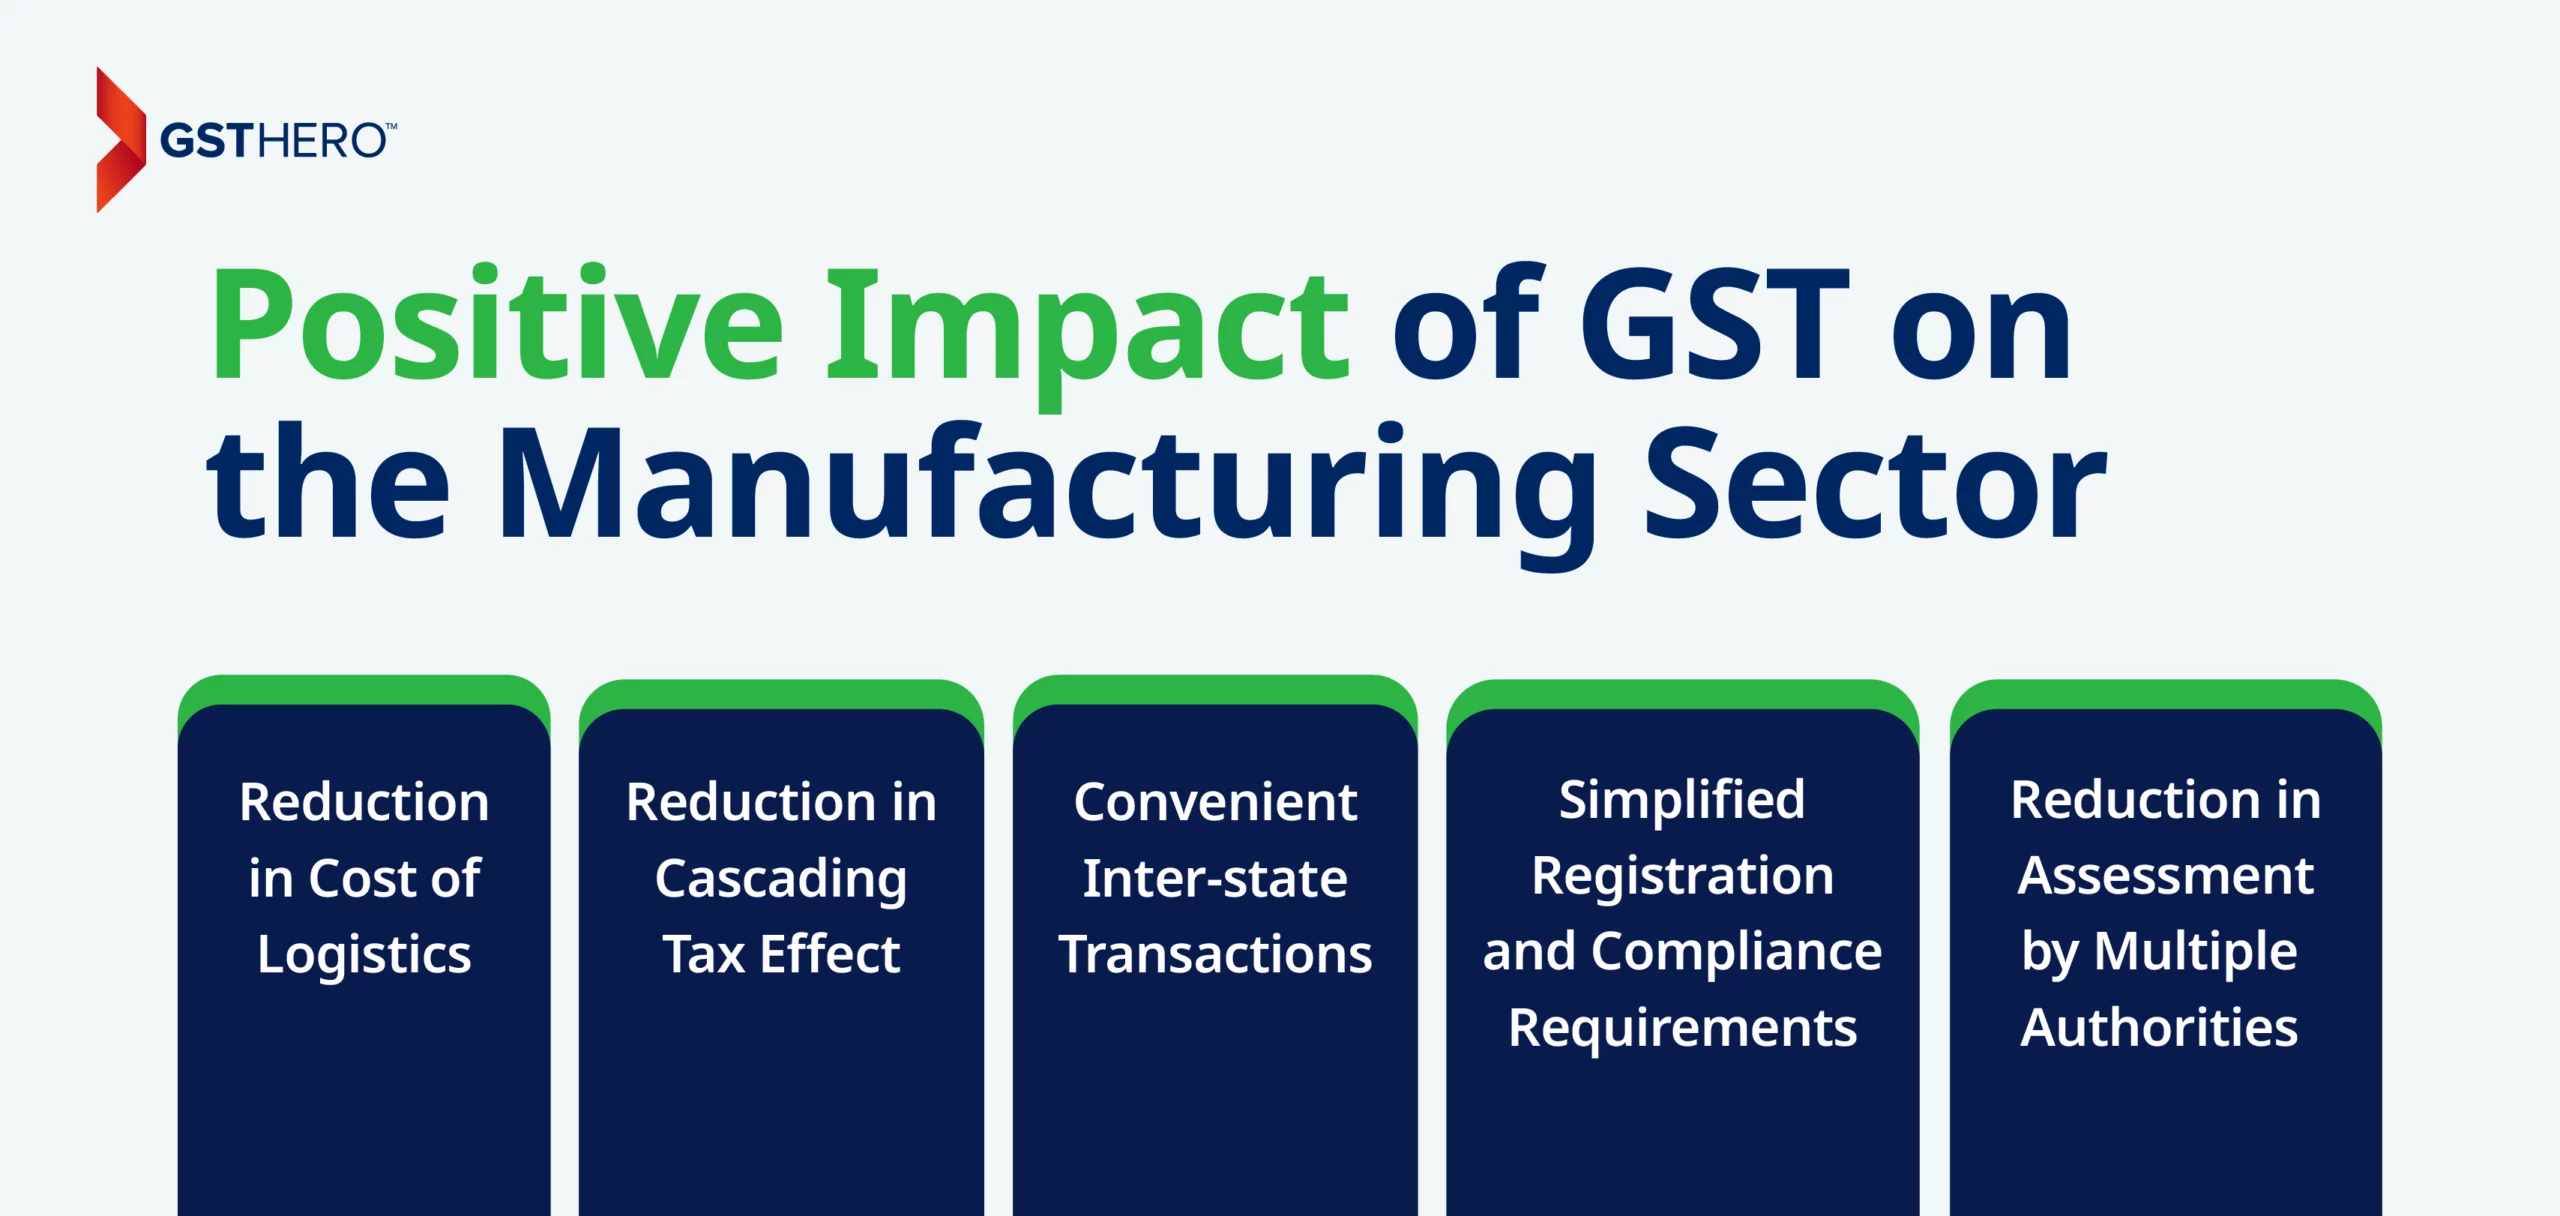 Positive Impact of GST on the Manufacturing Sector